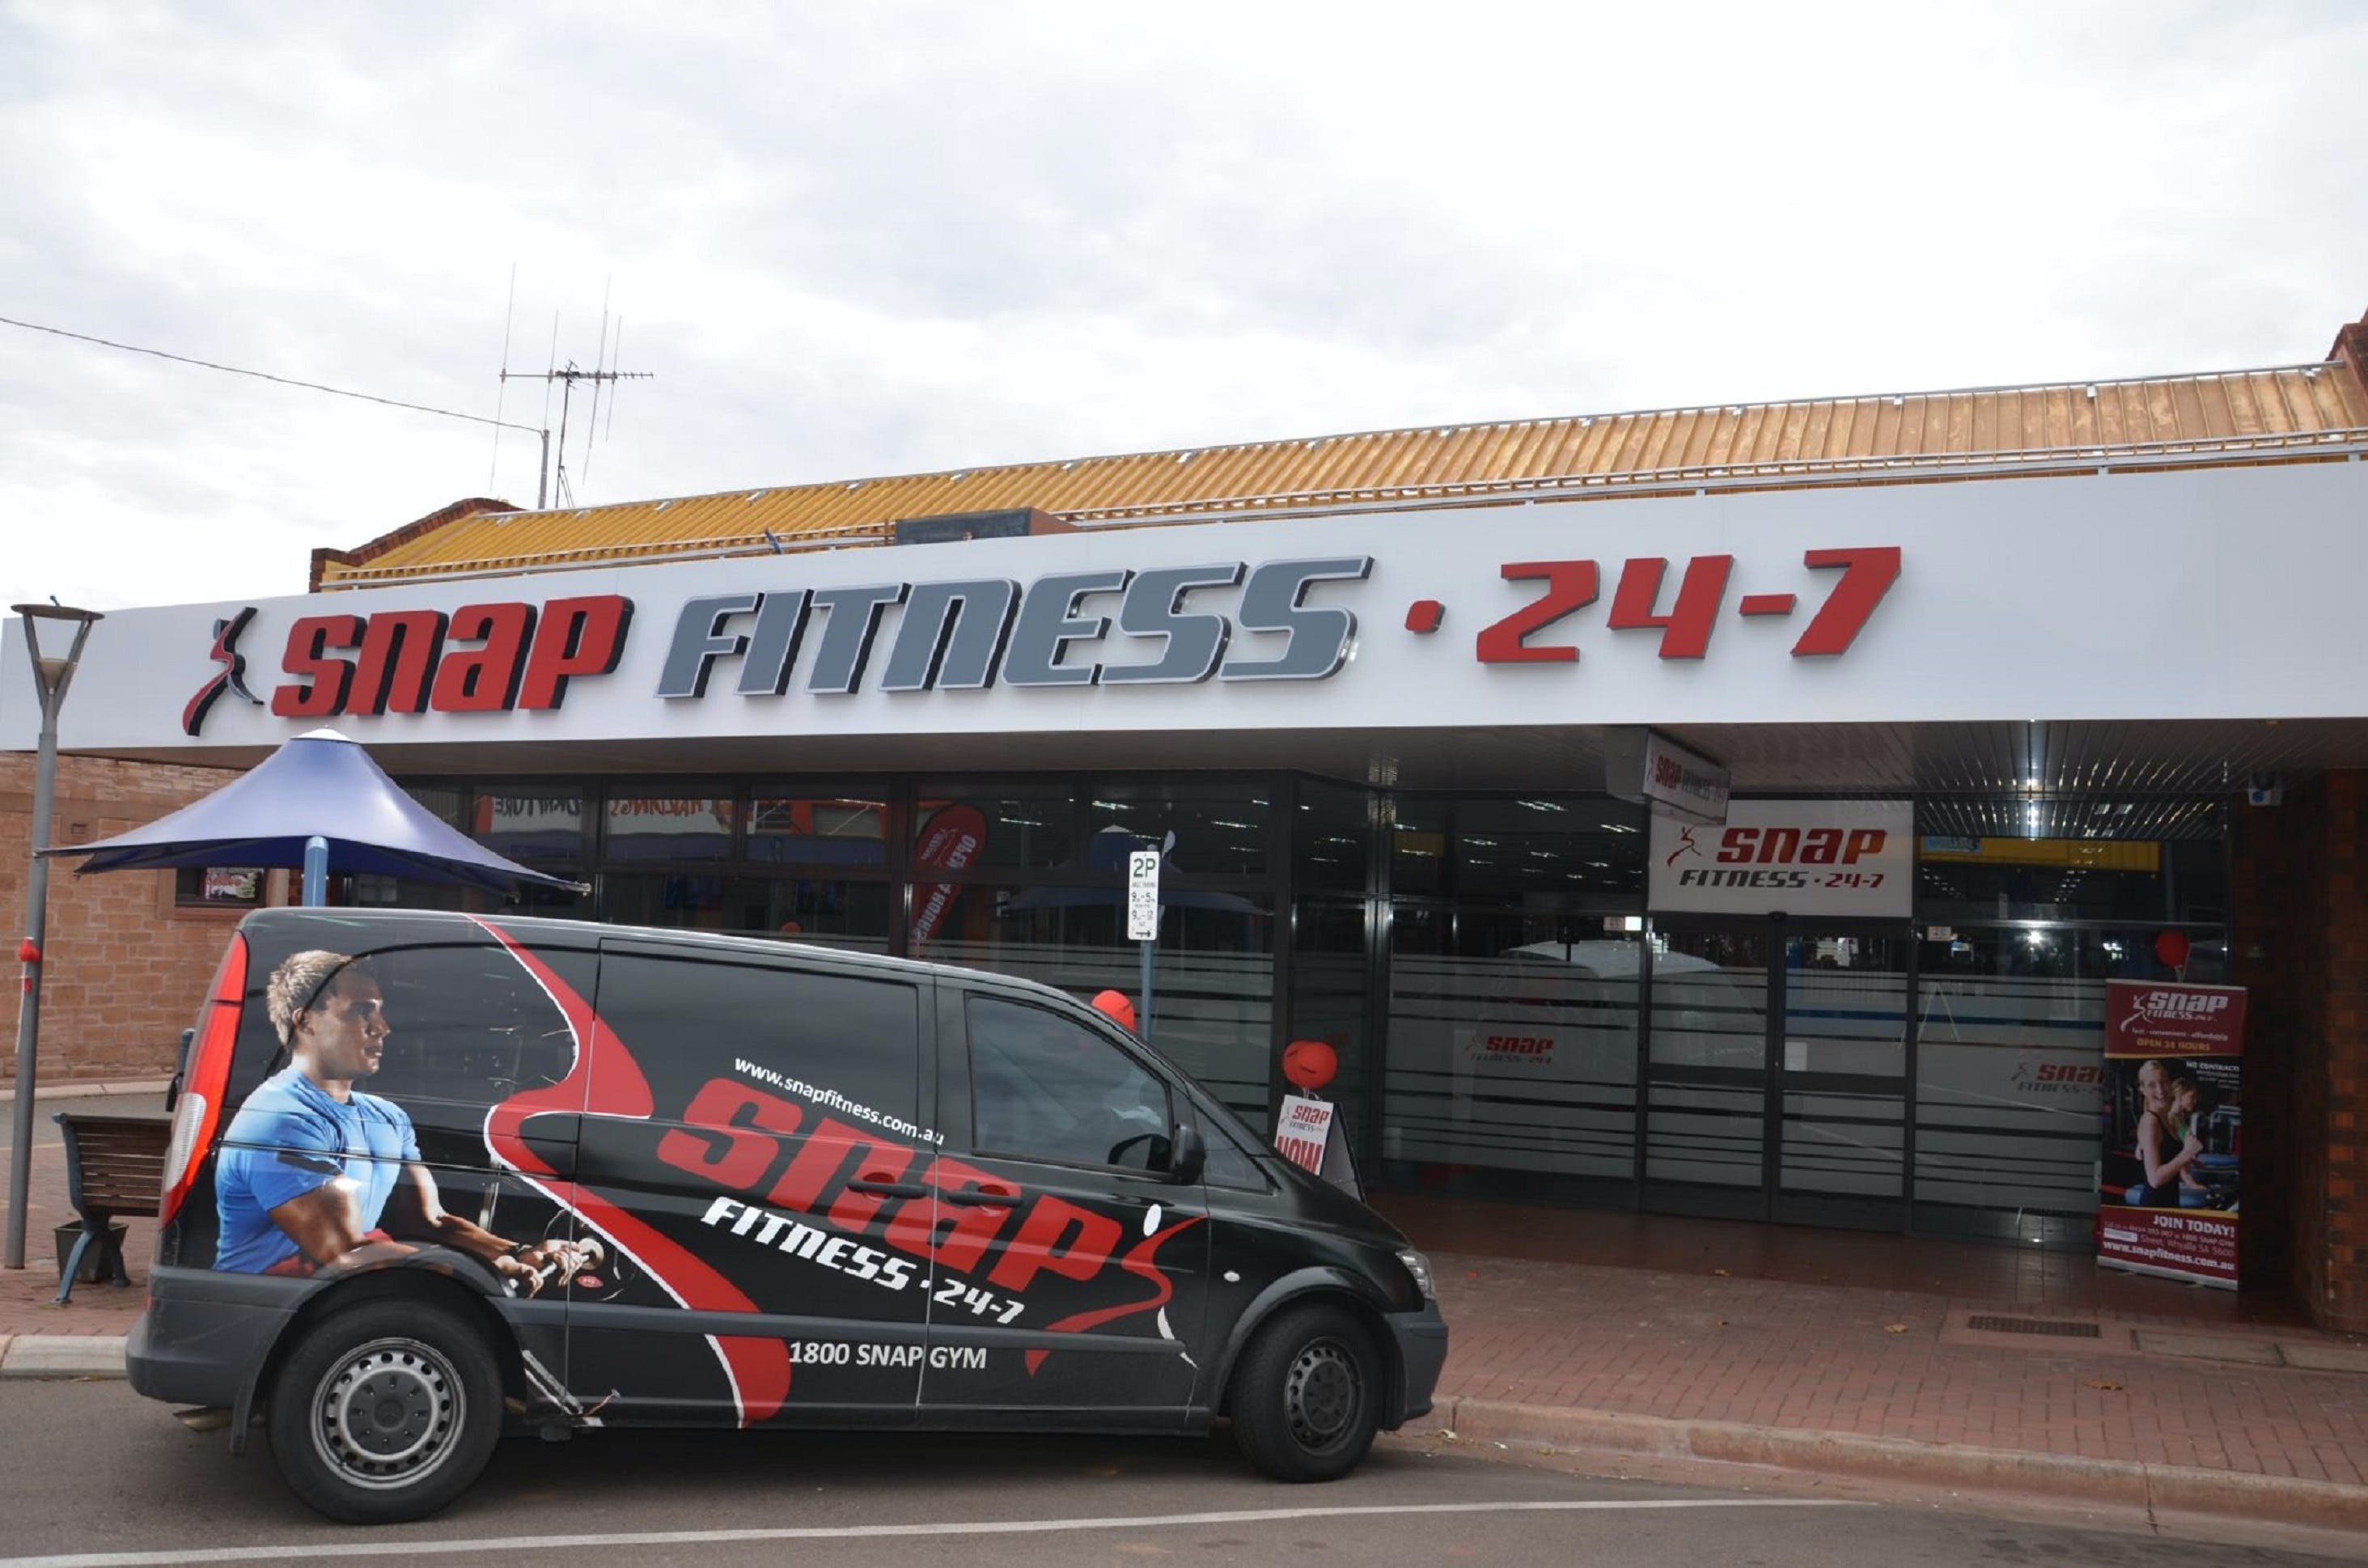 Snap Fitness Whyalla 24/7 gym - Tourism Adelaide